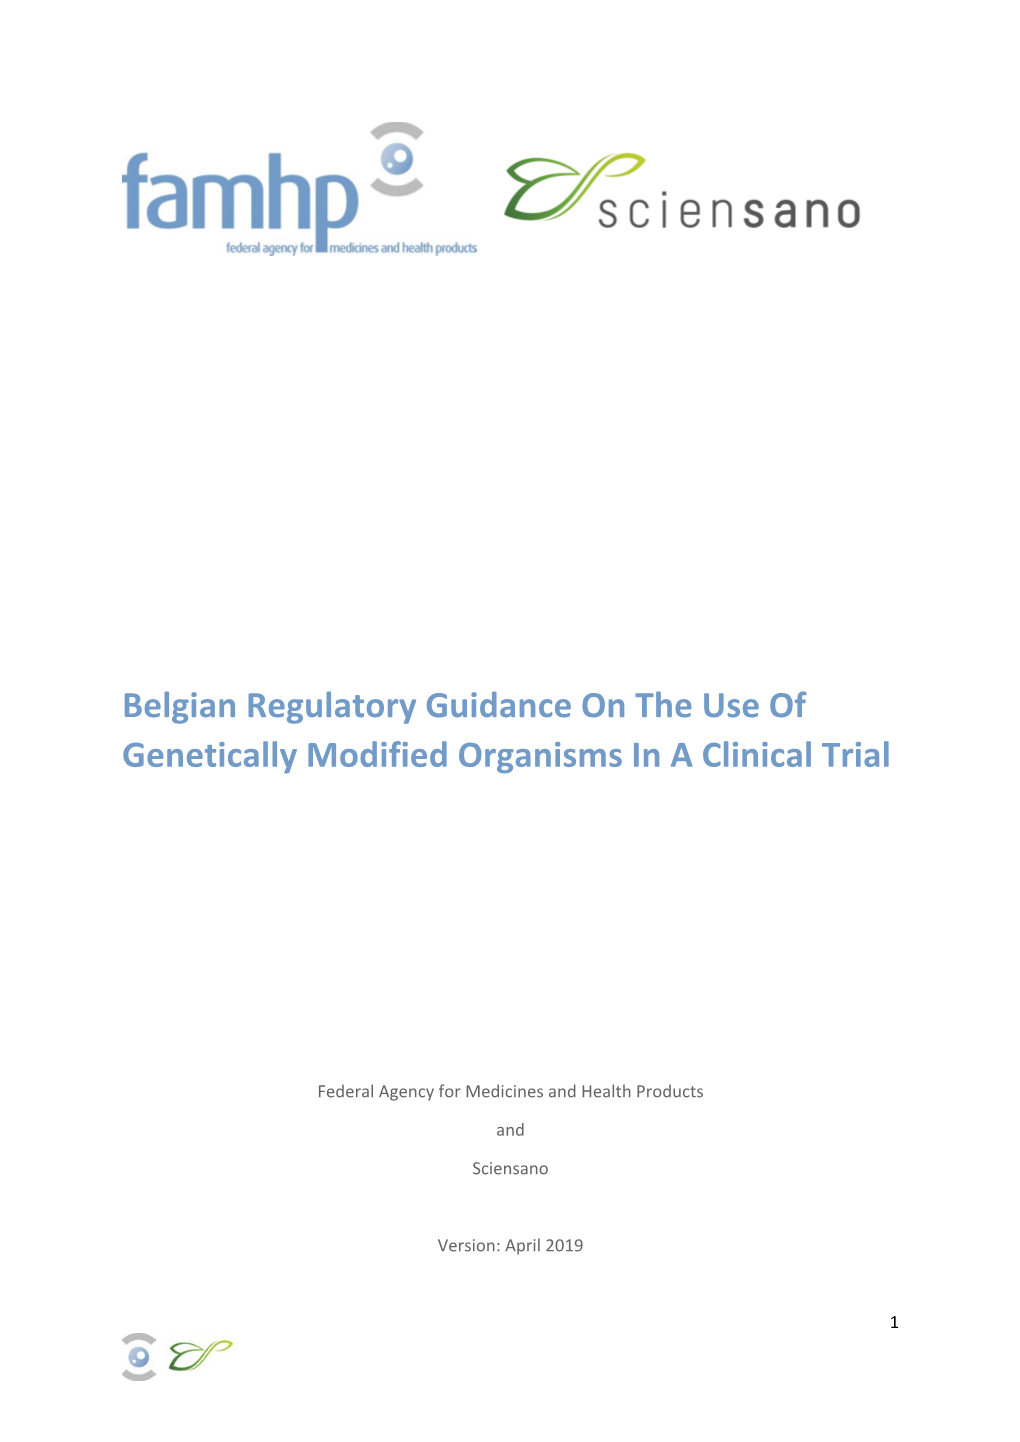 Belgian Regulatory Guidance on the Use of Genetically Modified Organisms in a Clinical Trial